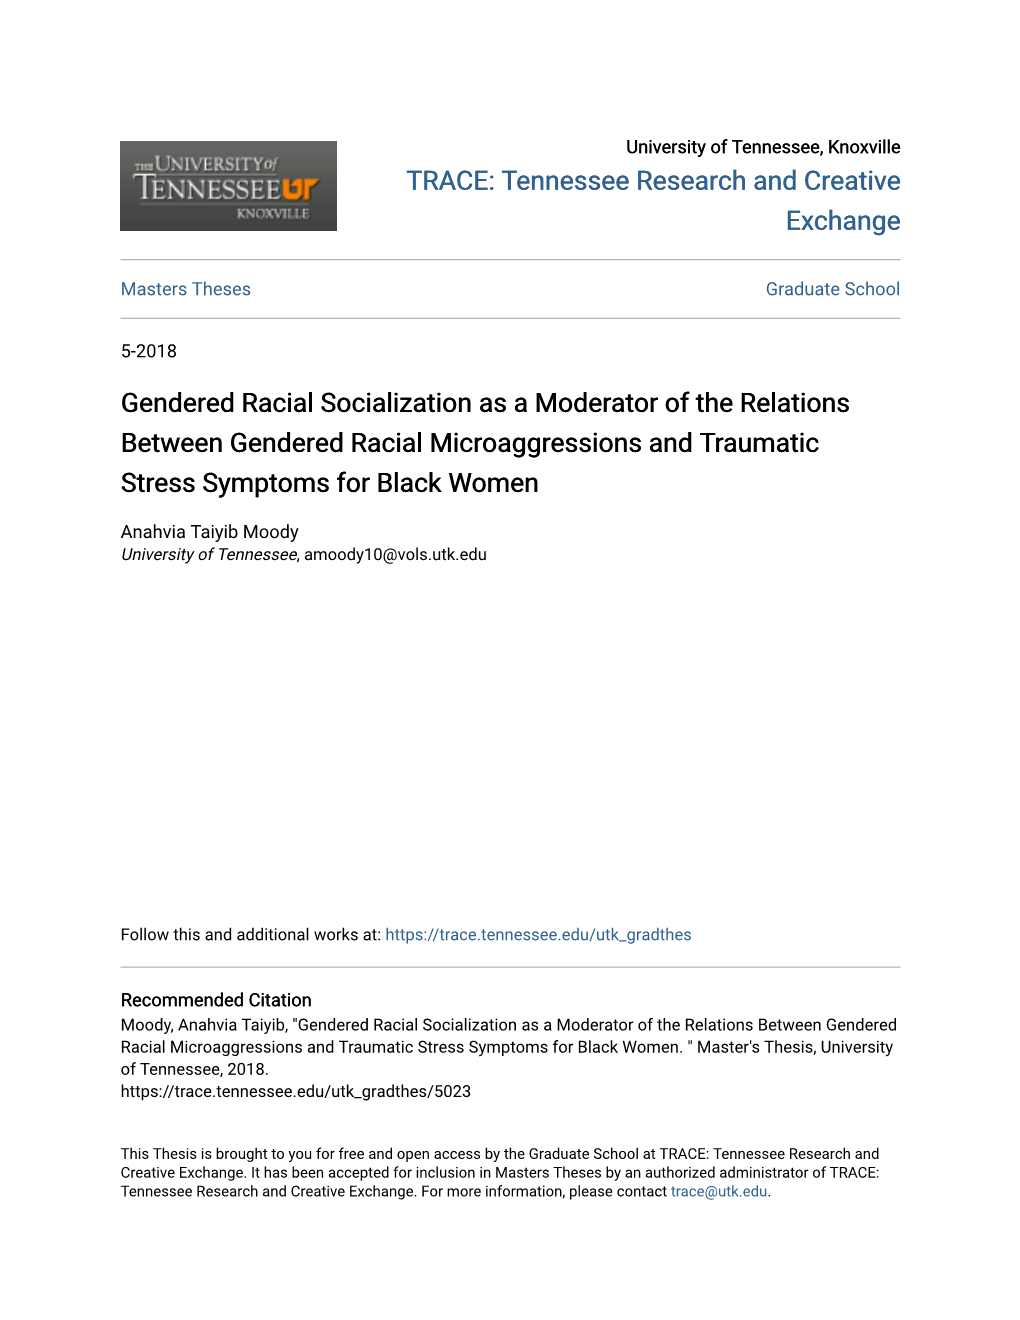 Gendered Racial Socialization As a Moderator of the Relations Between Gendered Racial Microaggressions and Traumatic Stress Symptoms for Black Women